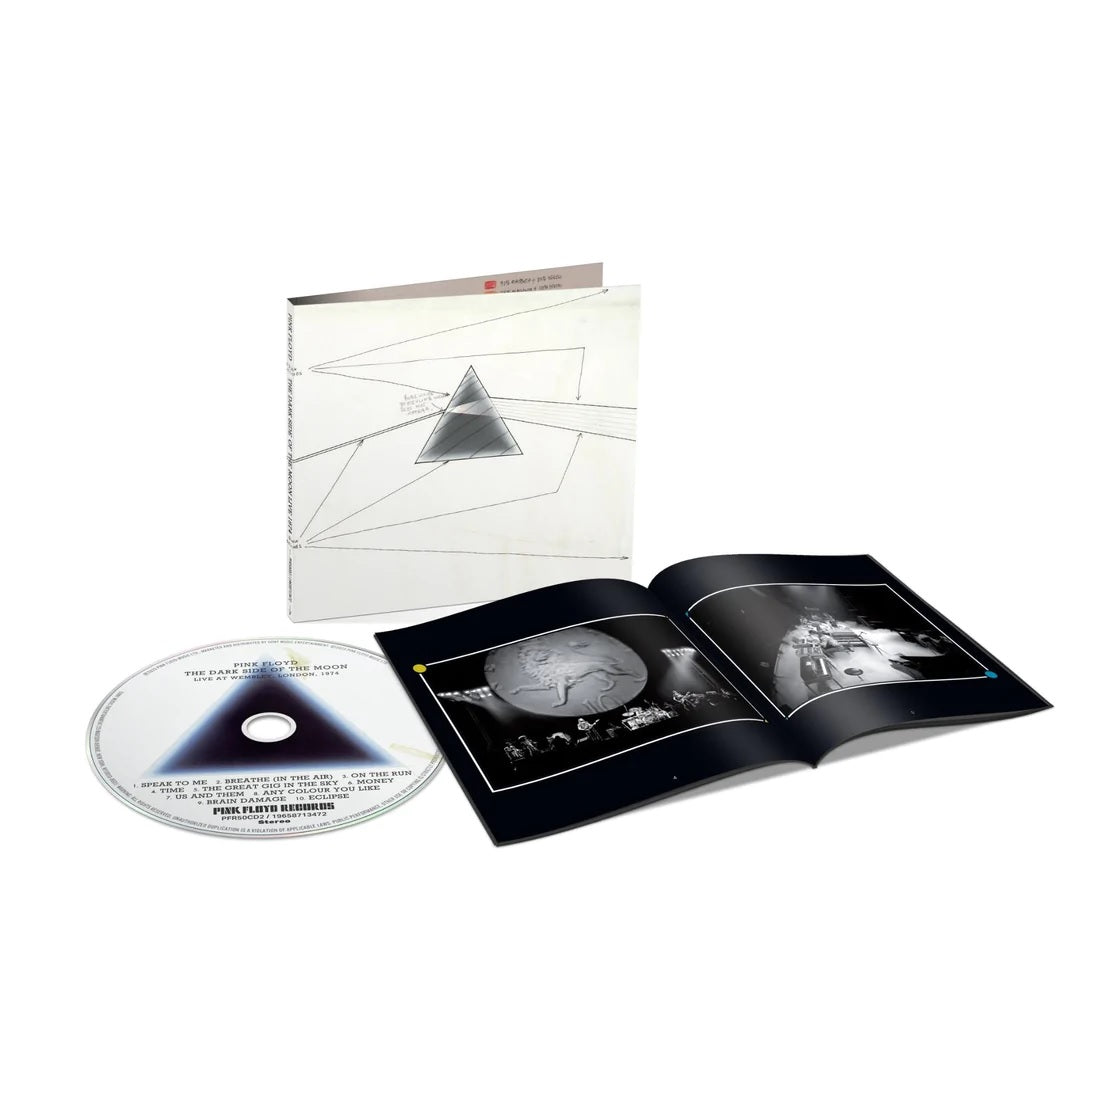 Pink Floyd - Dark Side Of The Moon, The: Live At Wembley 1974 - CD - New